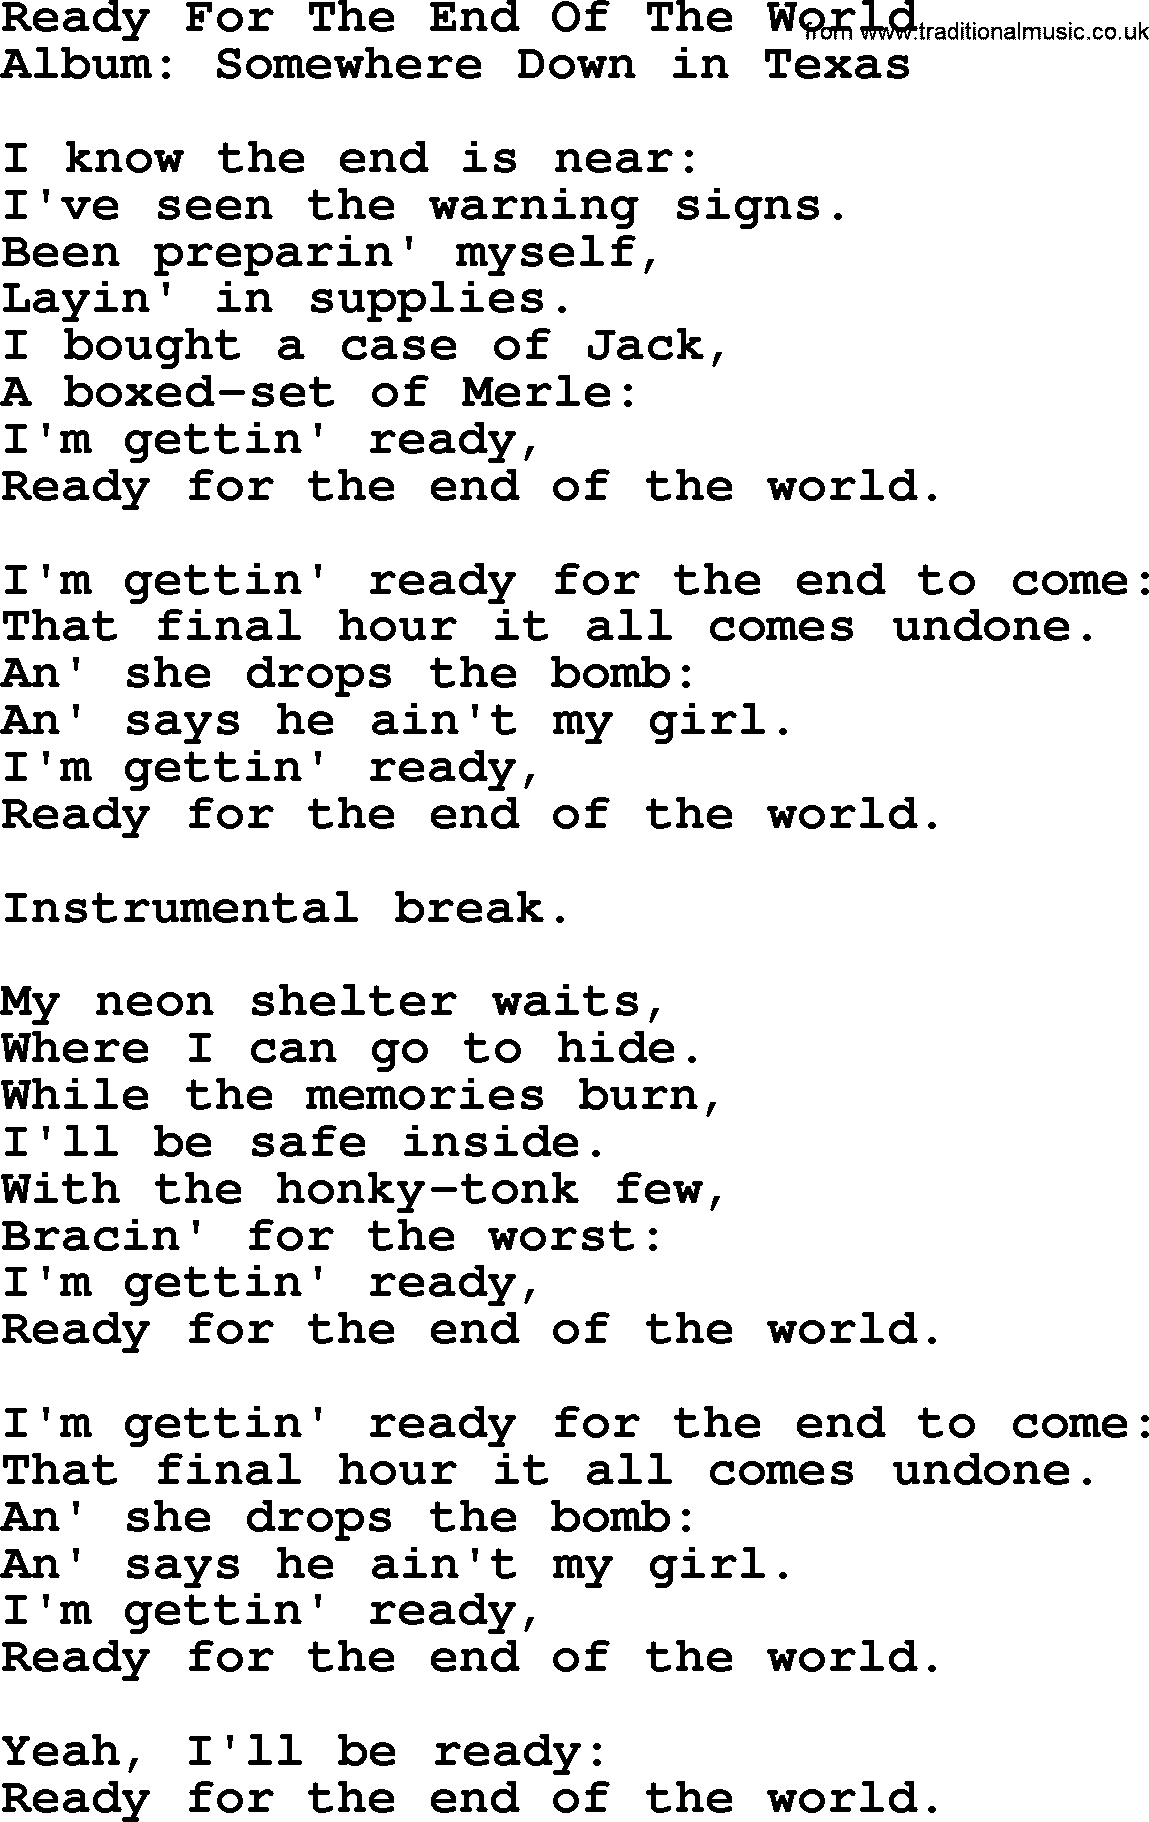 George Strait song: Ready For The End Of The World, lyrics